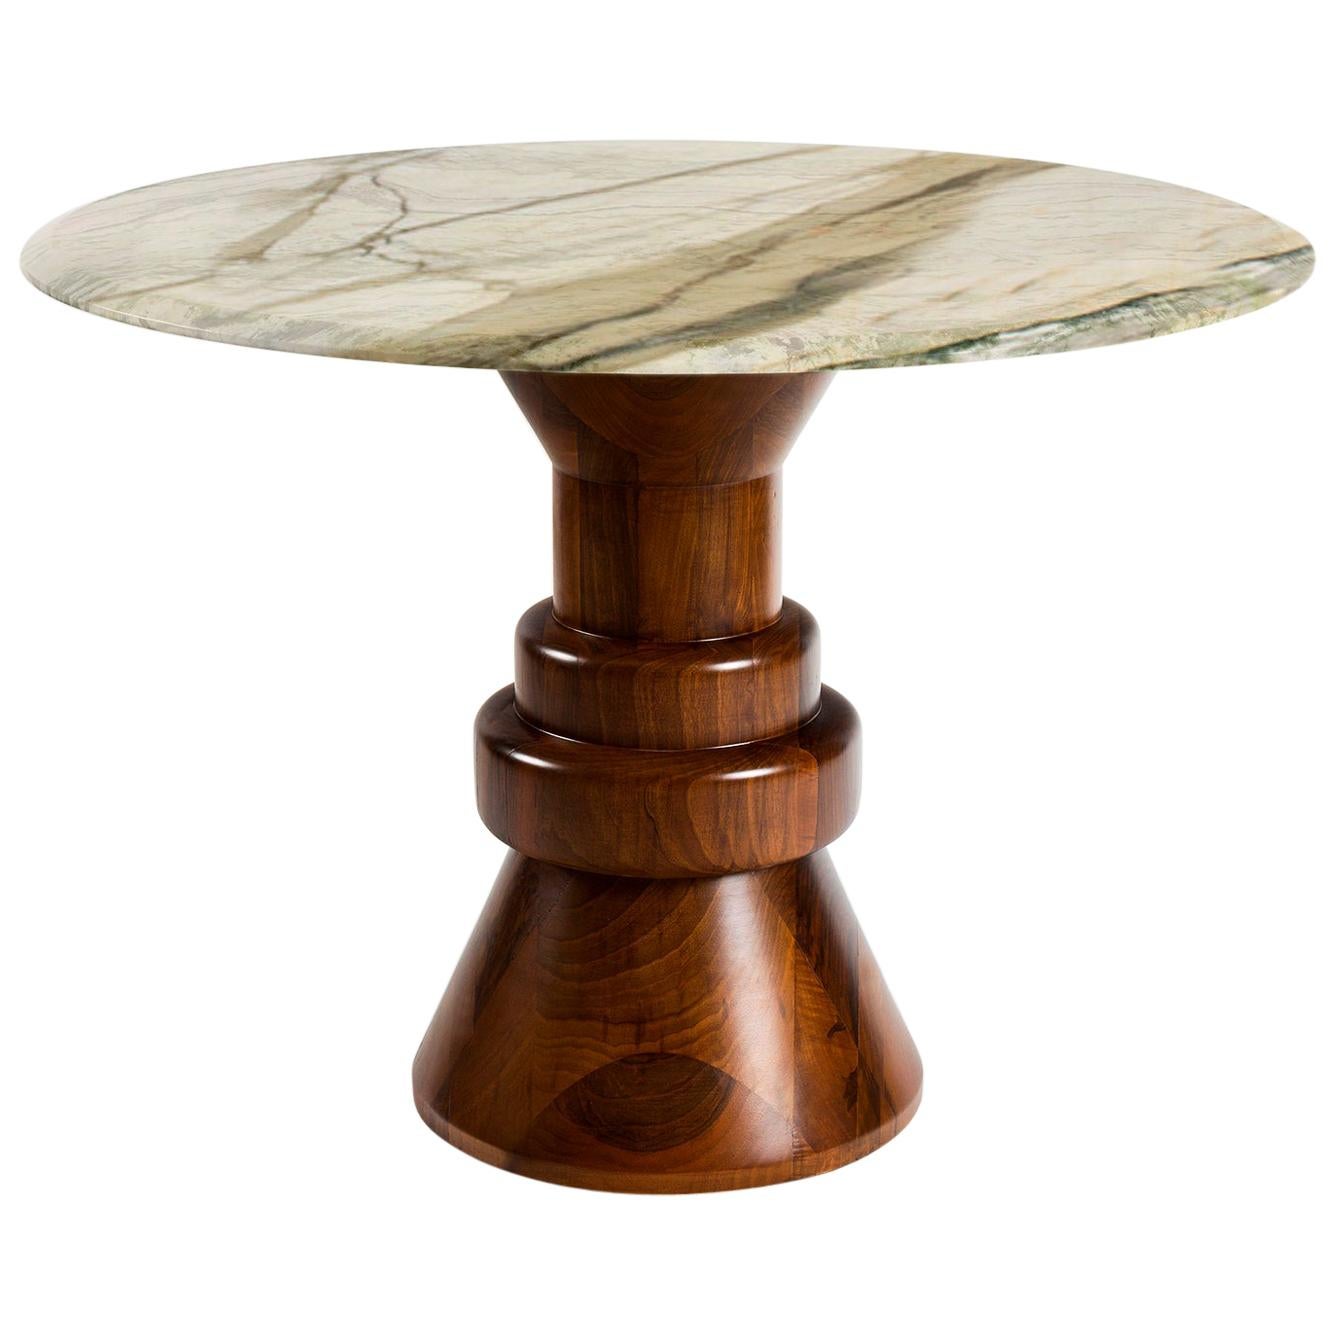 21st Century Cream Marble Round Dining Table with Sculptural Wooden Base